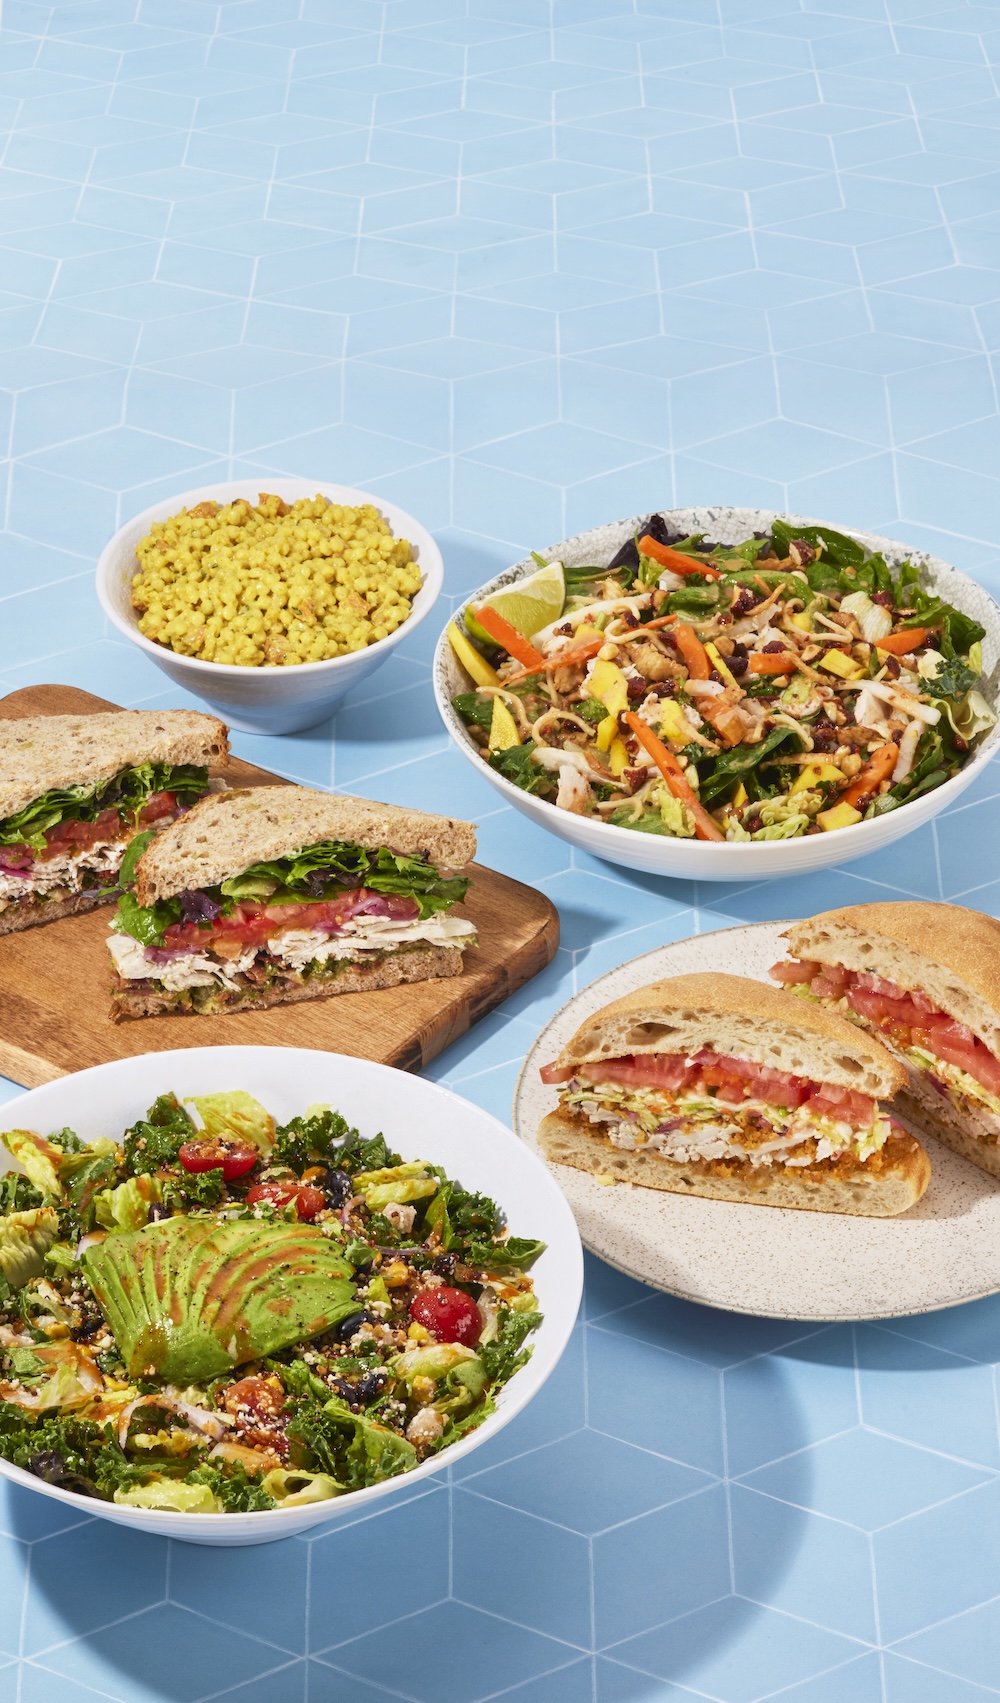 Sandwiches and salads with greens and corn